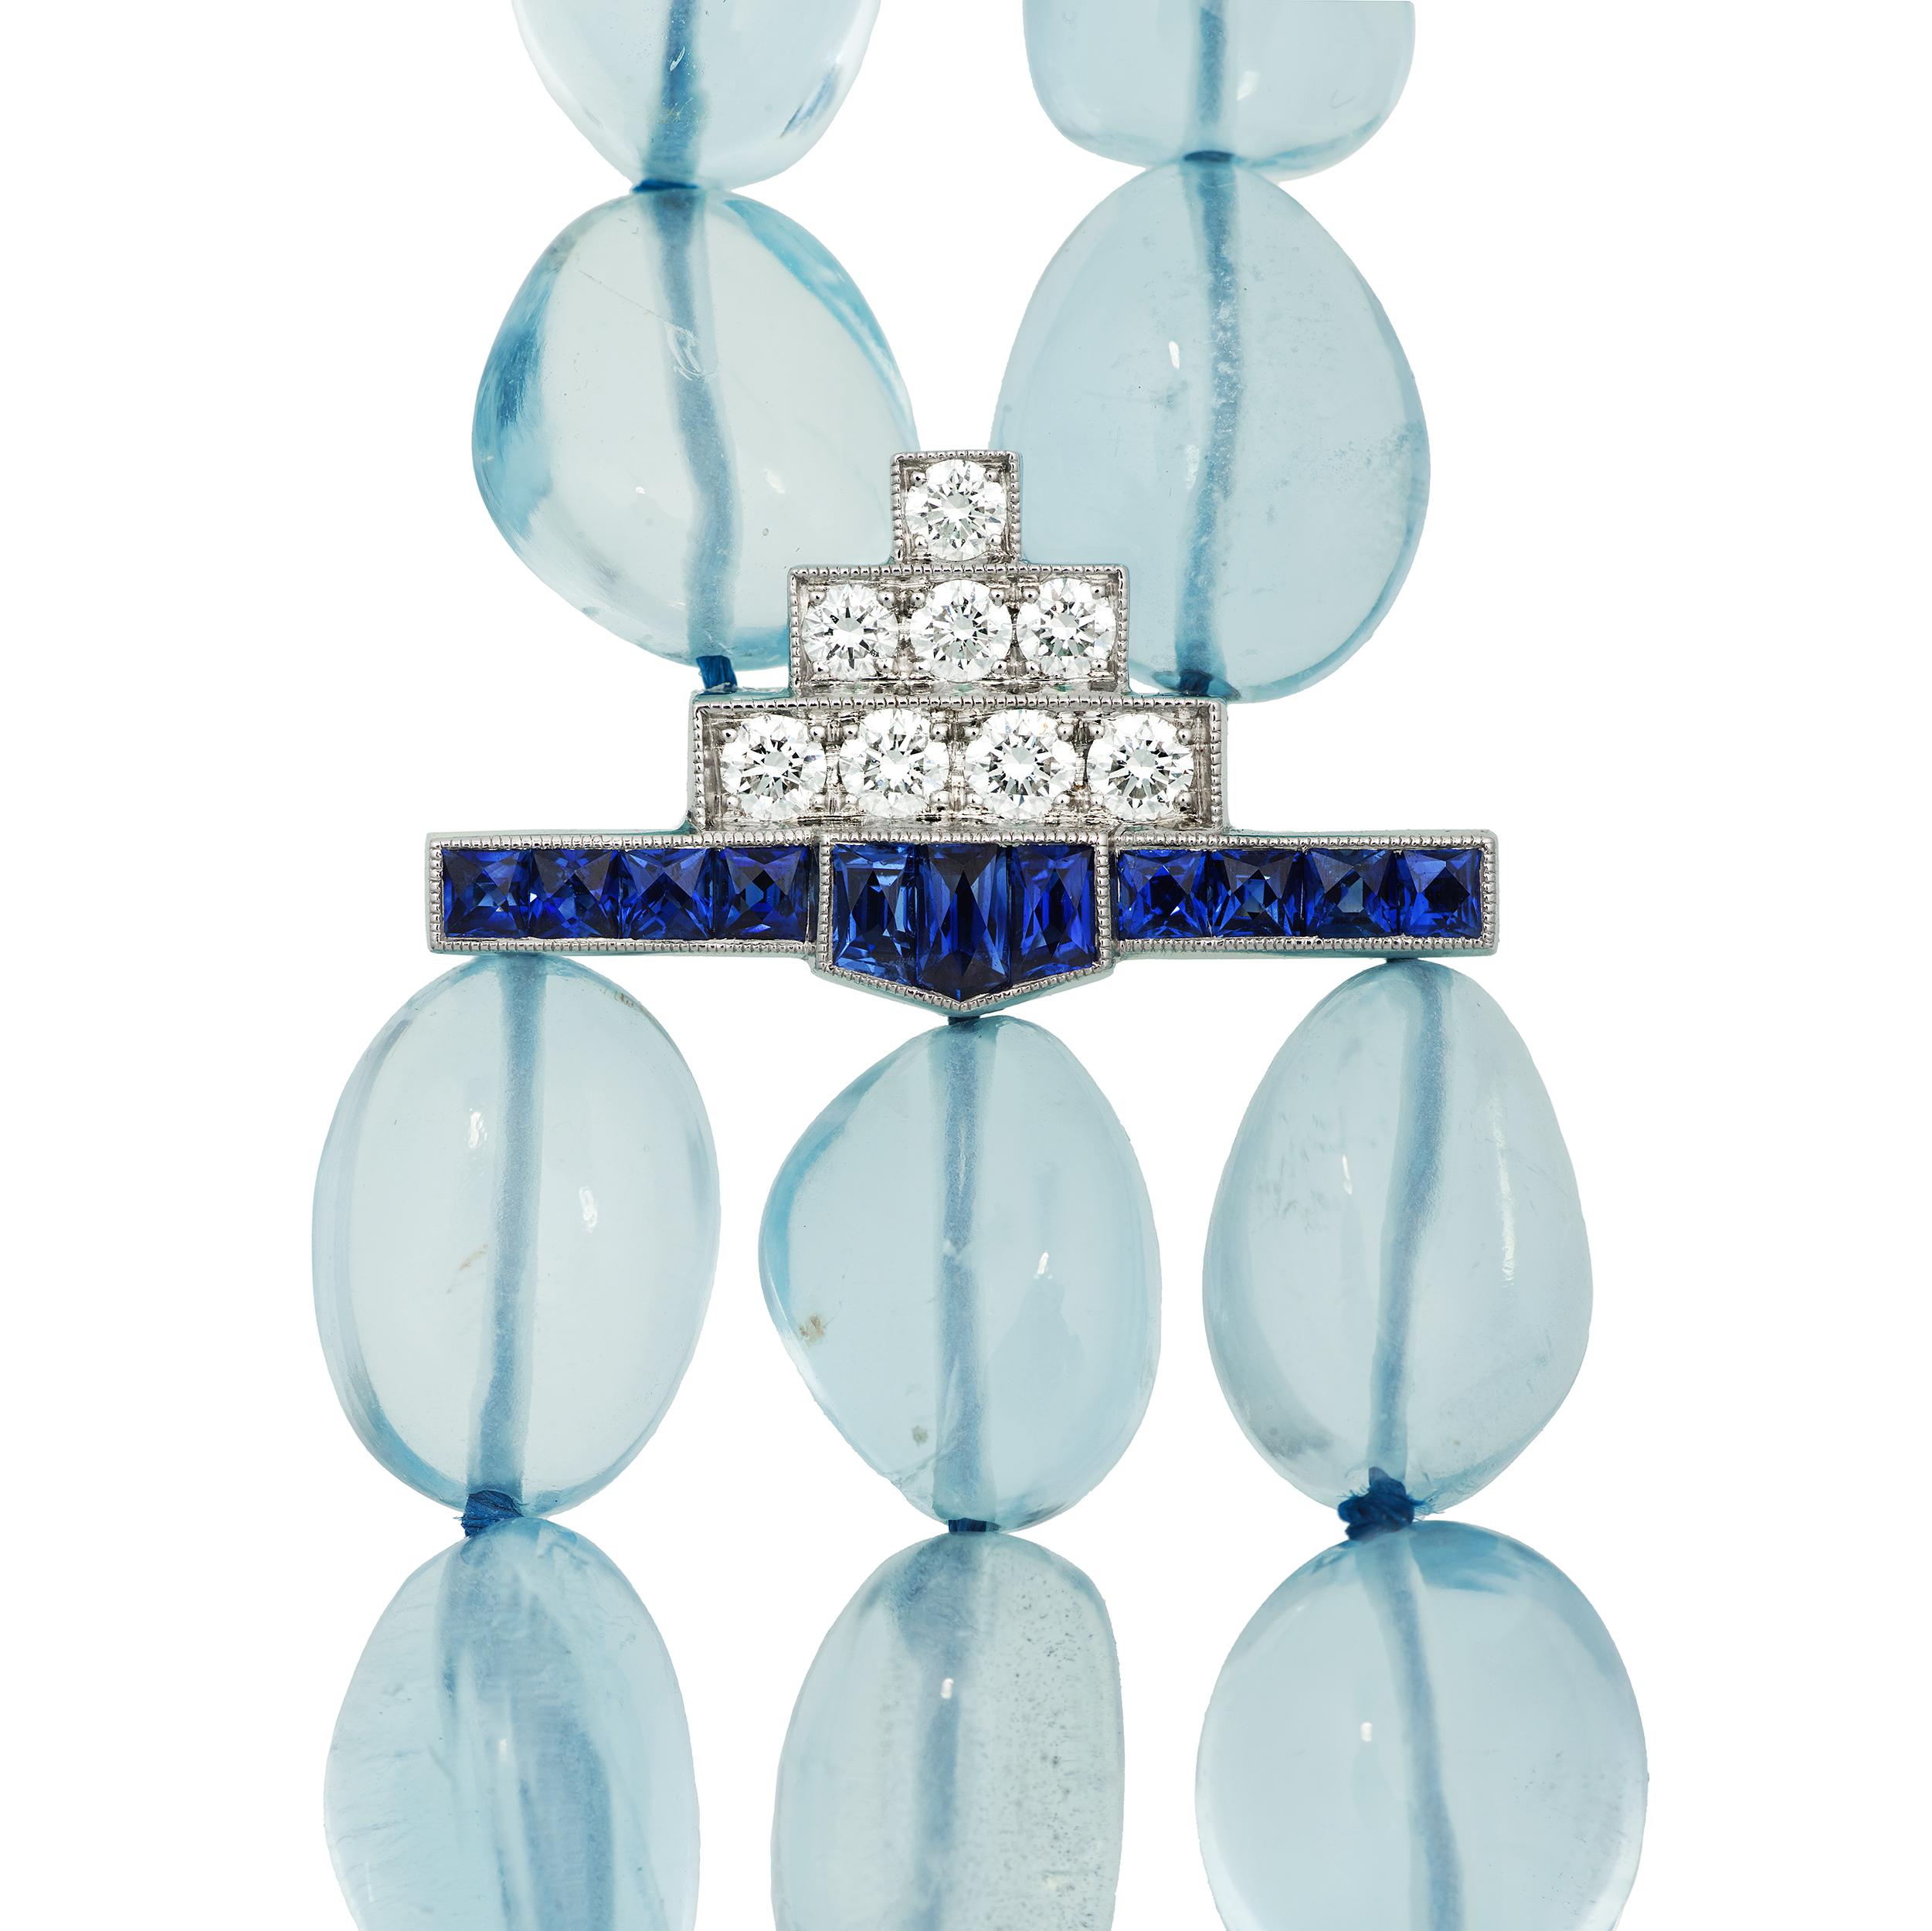 Inspiration for this incredible one of a kind Multi-strand necklace came from a vintage ring that can be called nothing short of a bauble.  Drawing from the inspiration came luxurious but organic Aquamarine.  They had to hold substance yet maintain